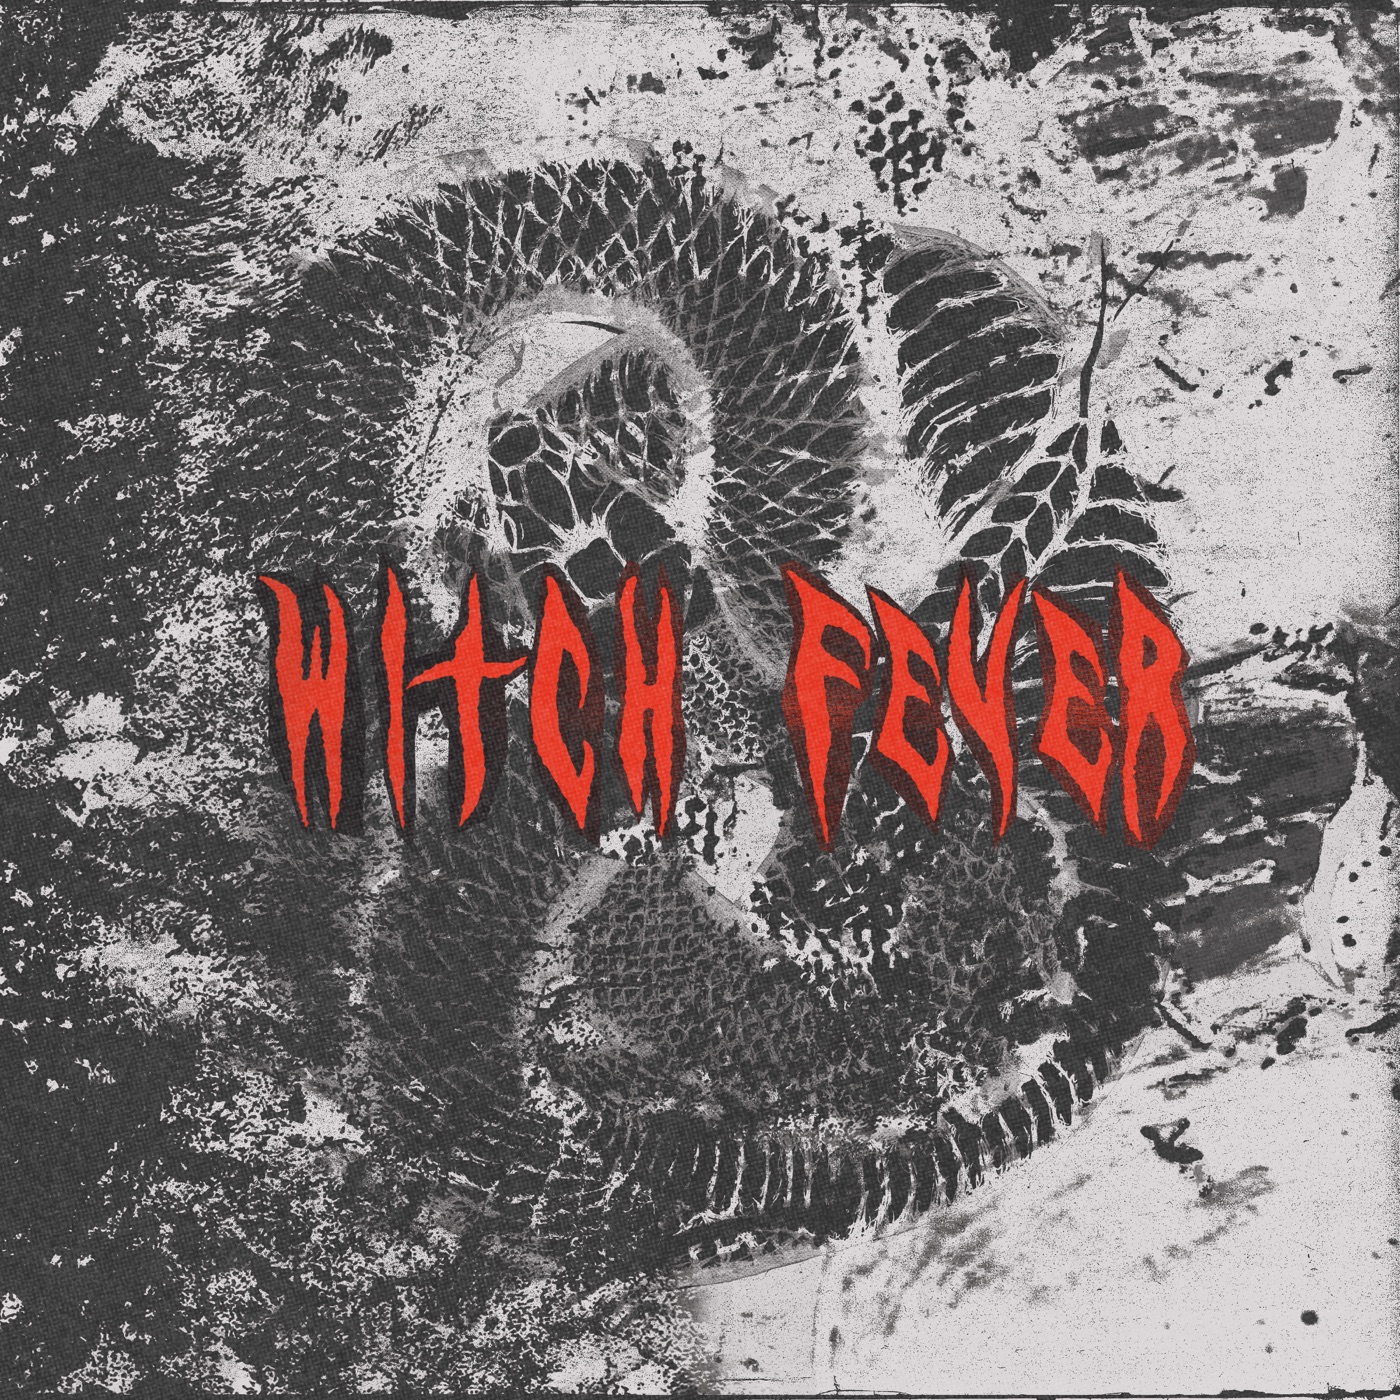 Reincarnate by Witch Fever